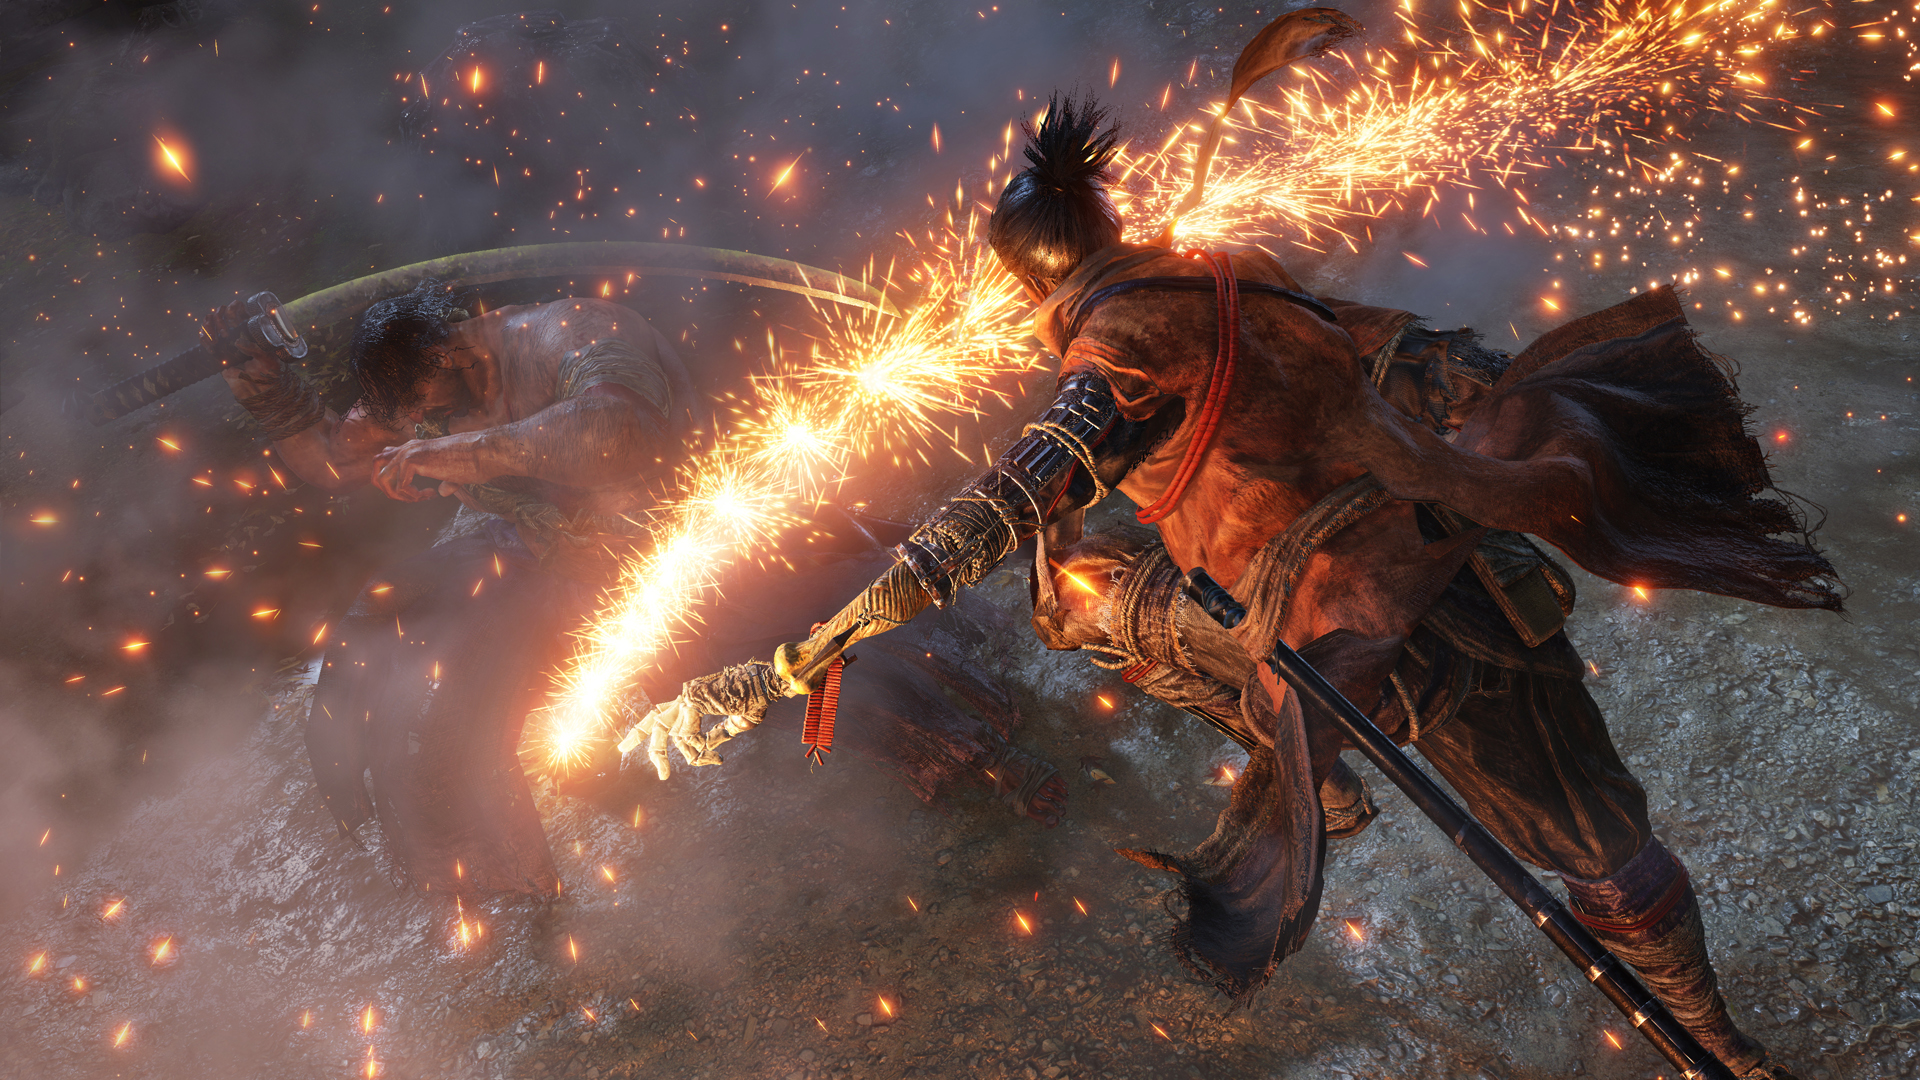 Image result for Sekiro, From Software's next game, subverts nearly everything we've come to expect from Dark Souls